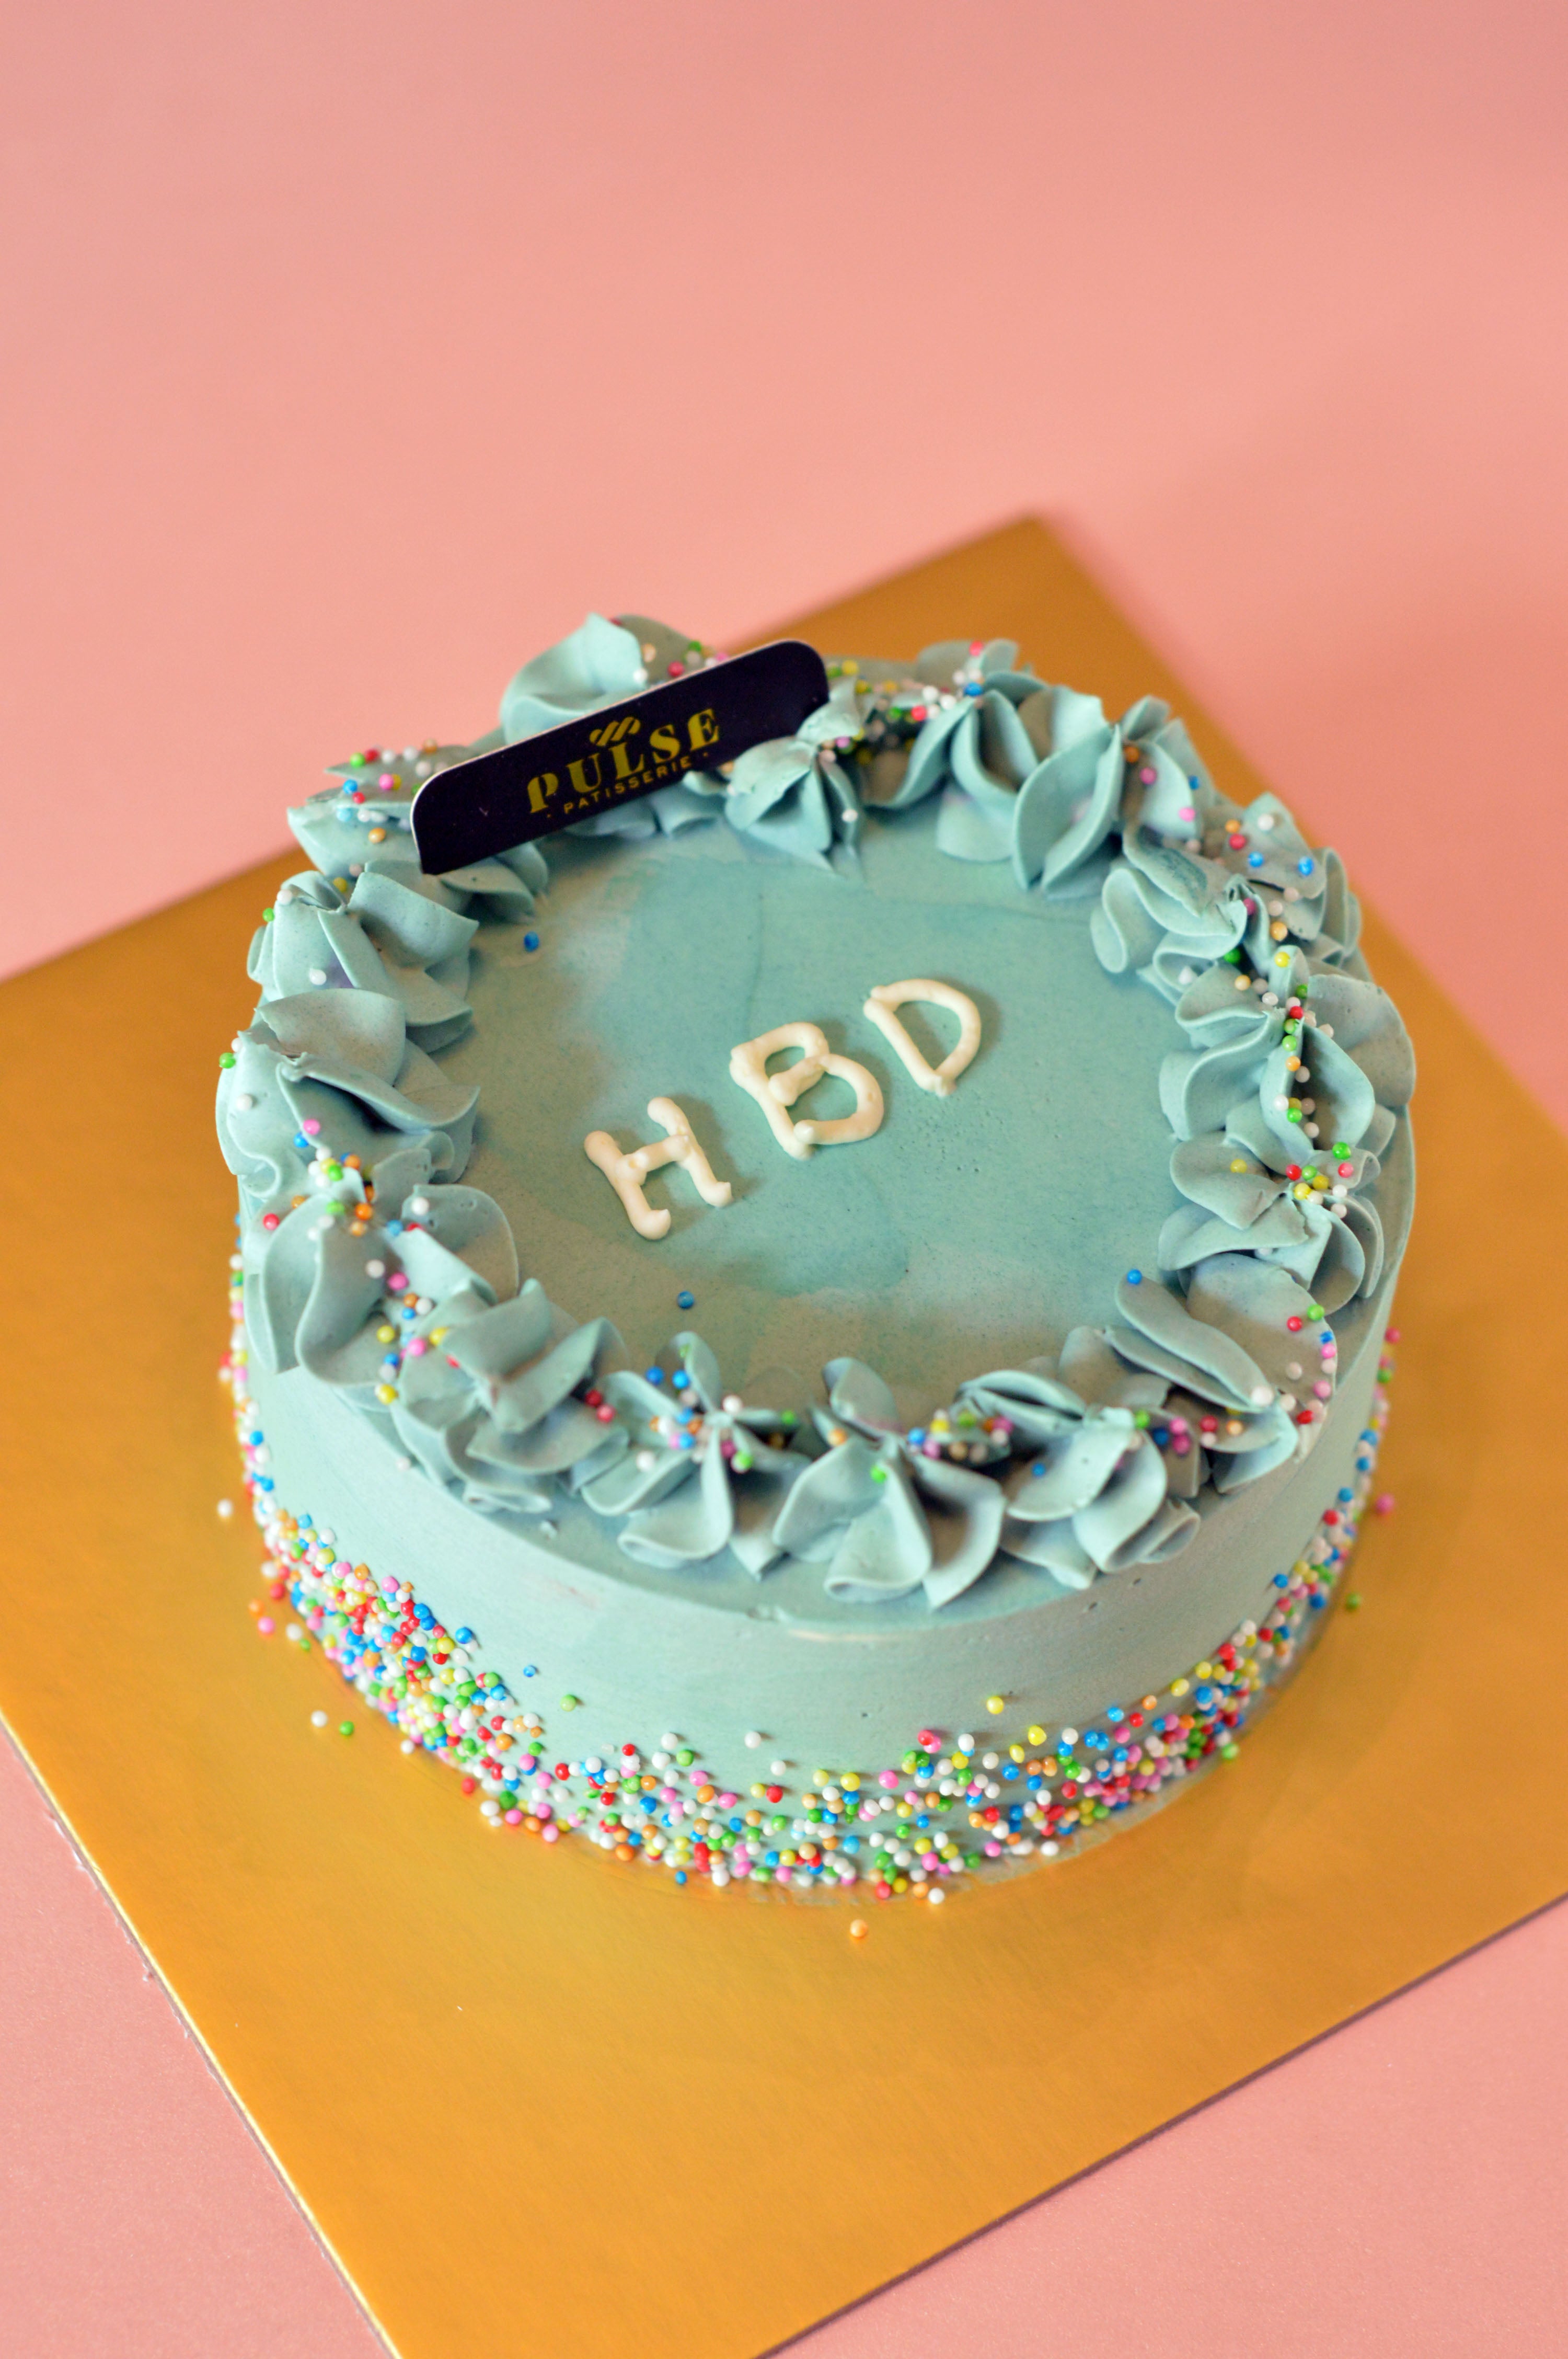 Send Cakes to Trichy, Online Cake Delivery in Trichy, Order Cakes in  Tiruchirappalli